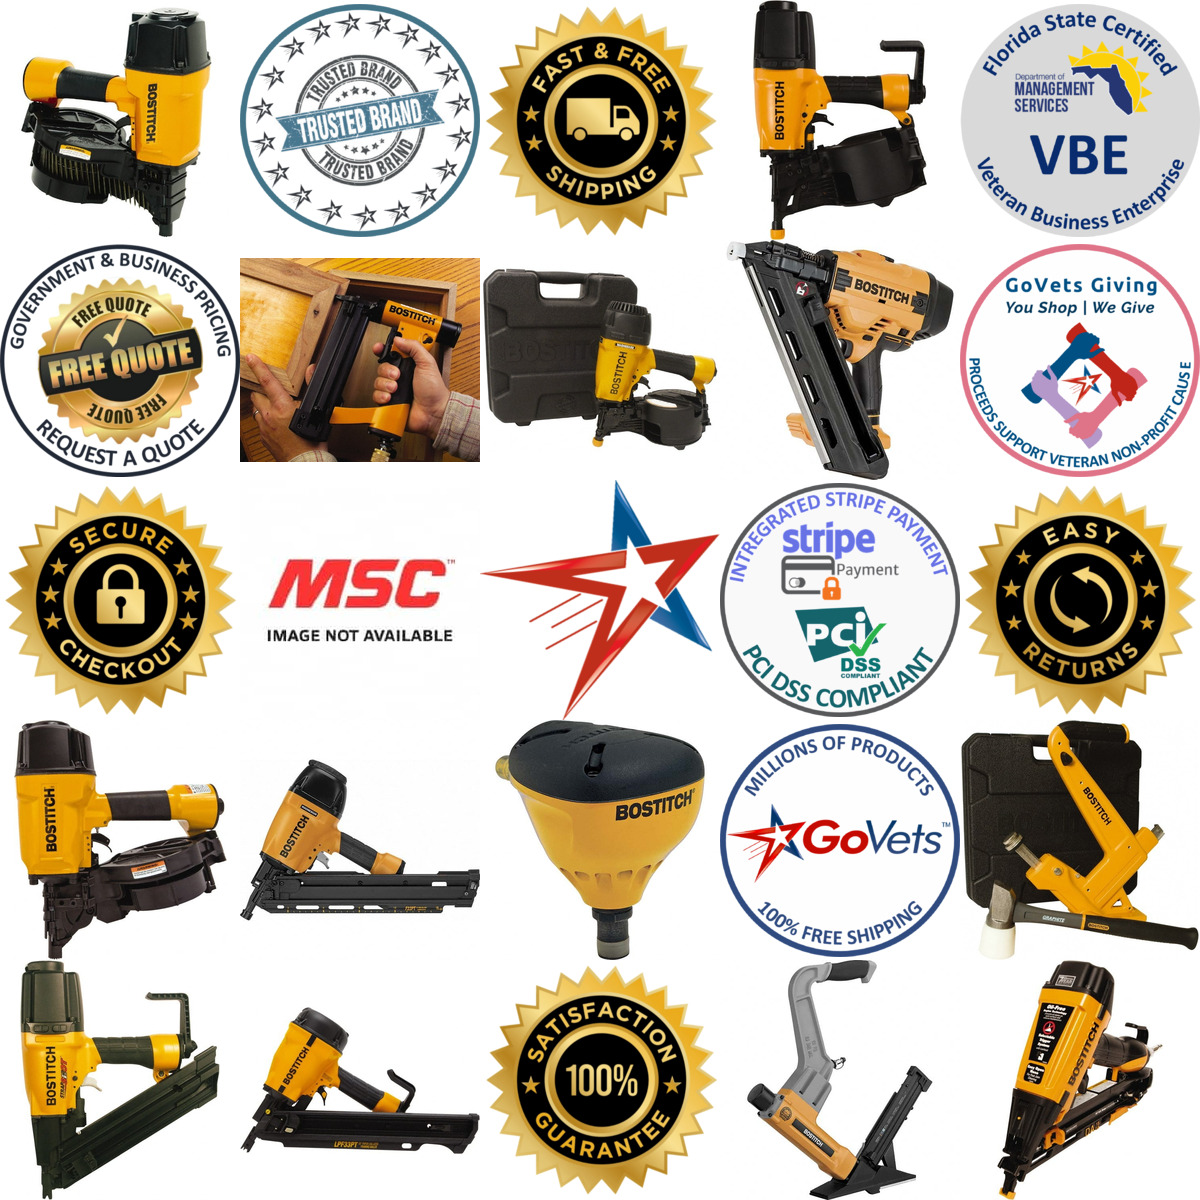 A selection of Stanley Bostitch products on GoVets